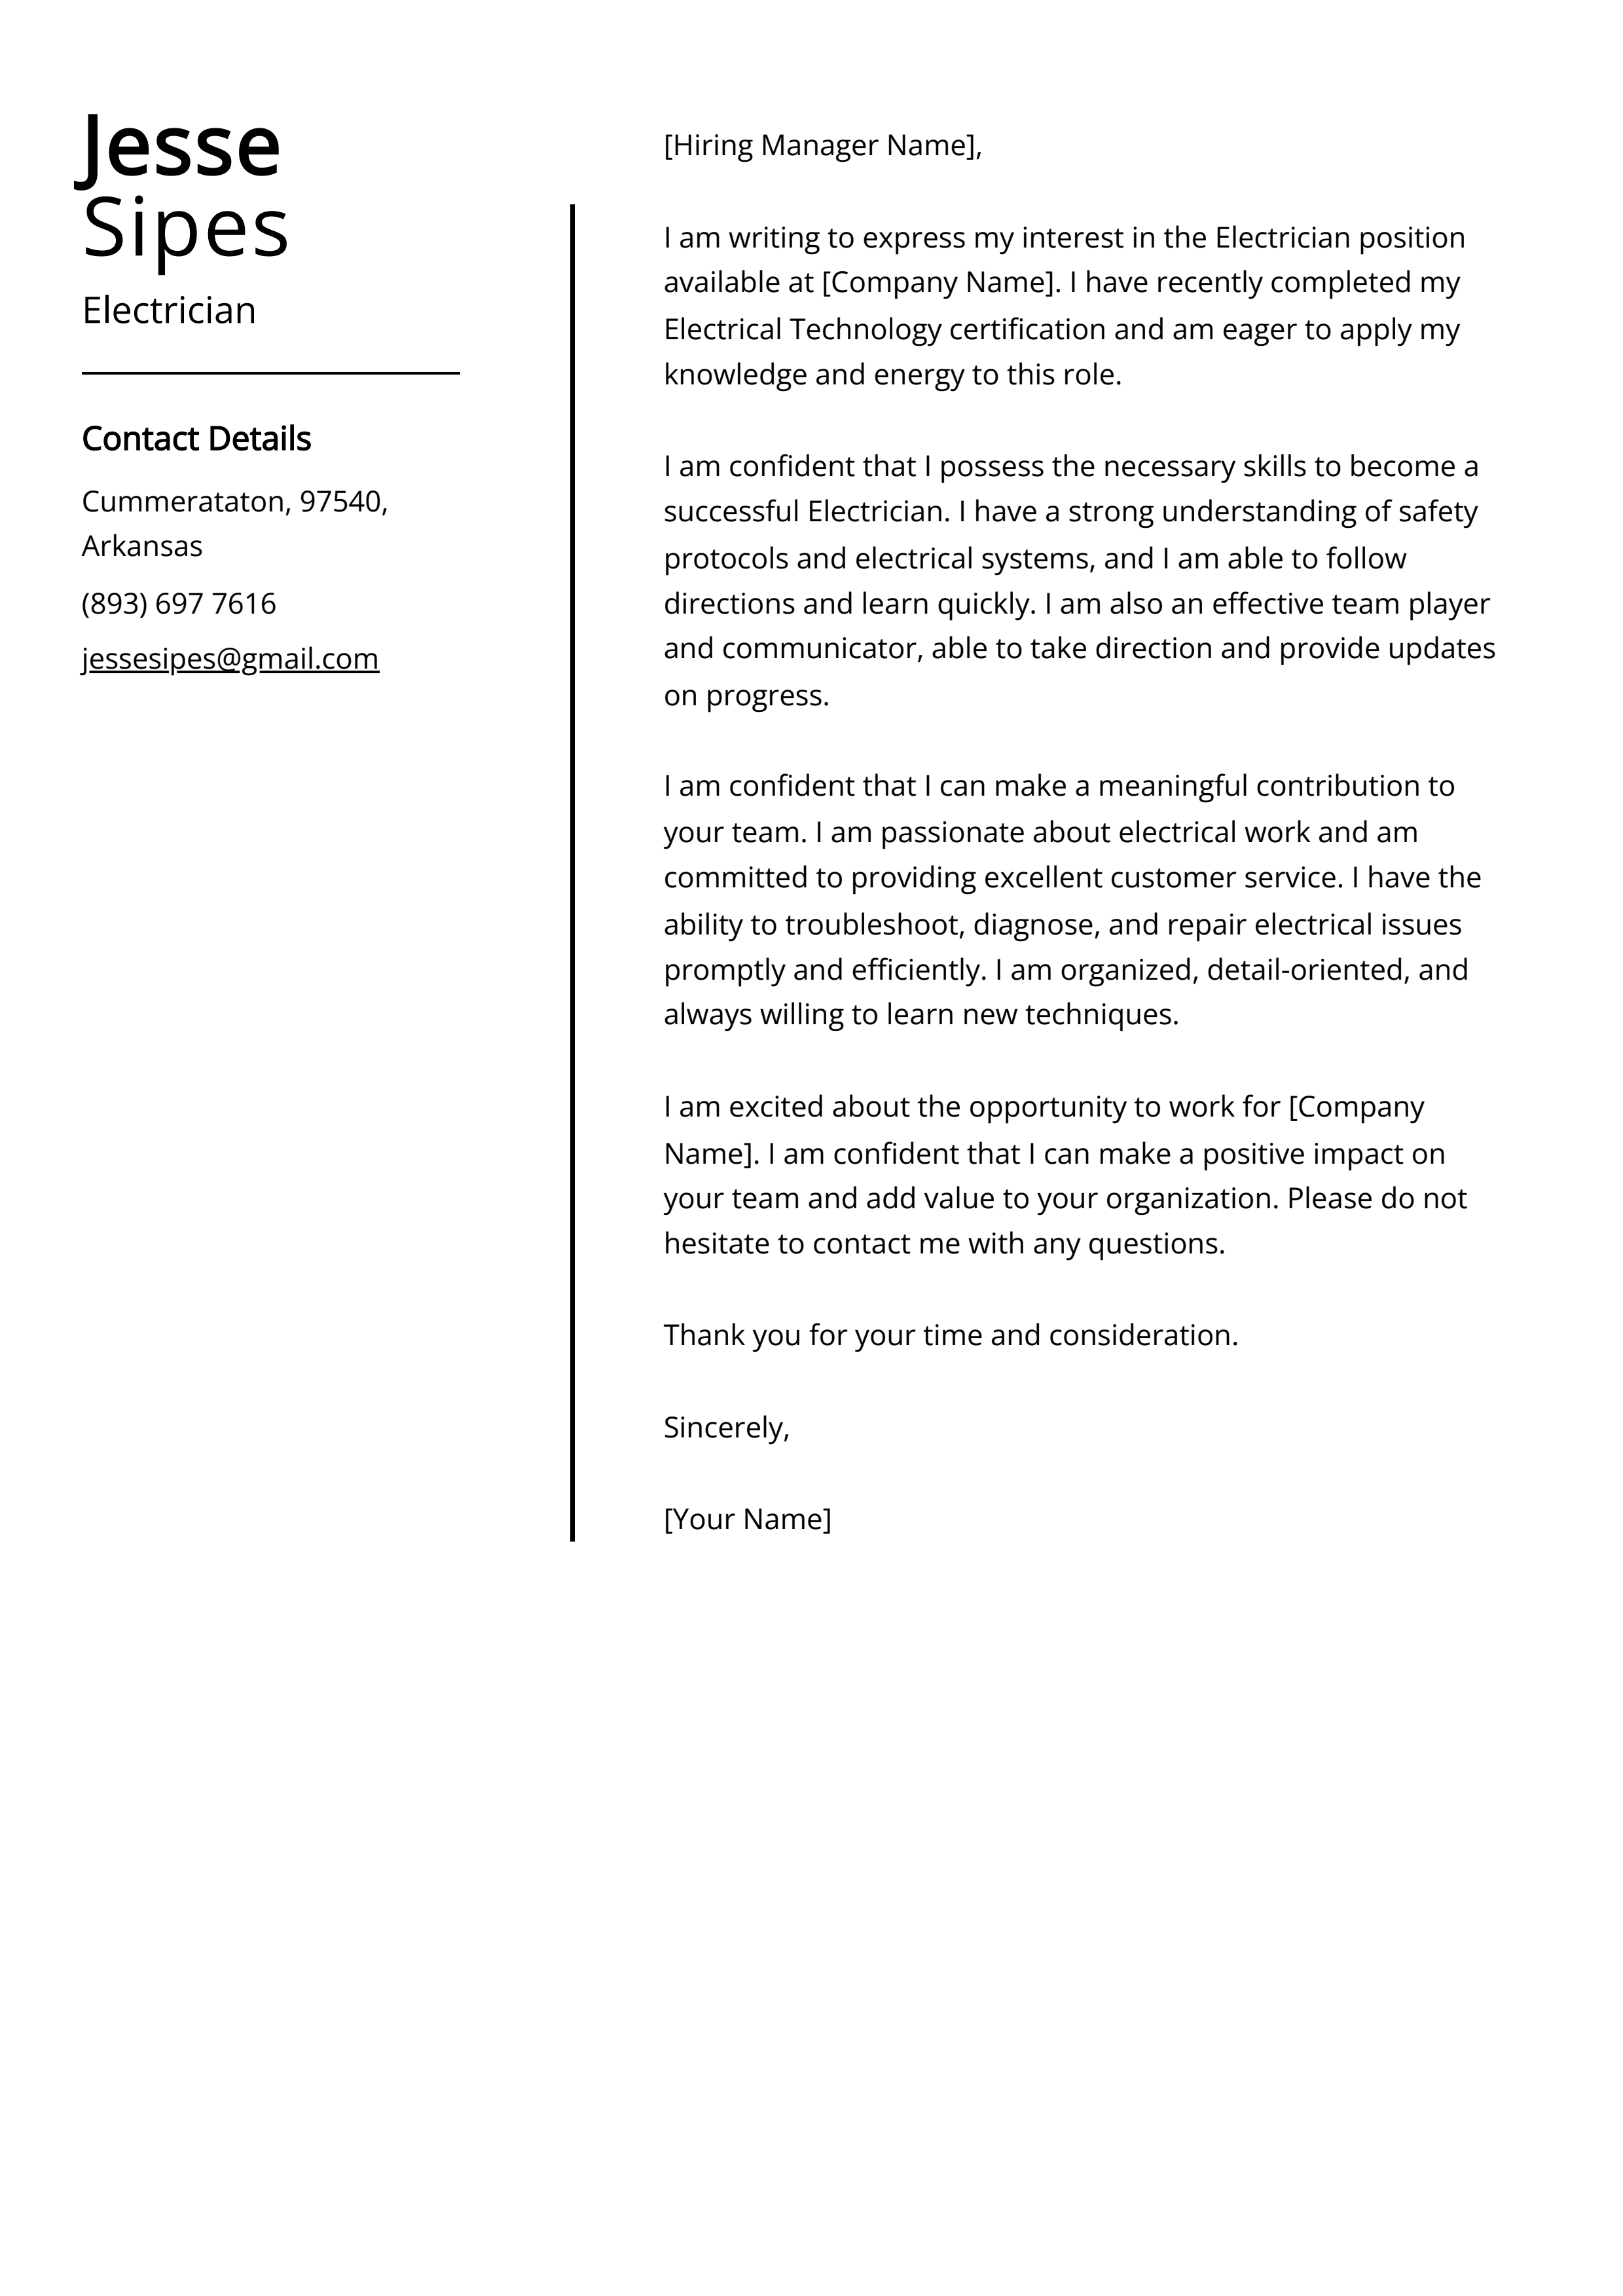 Experienced Electrician Cover Letter Example